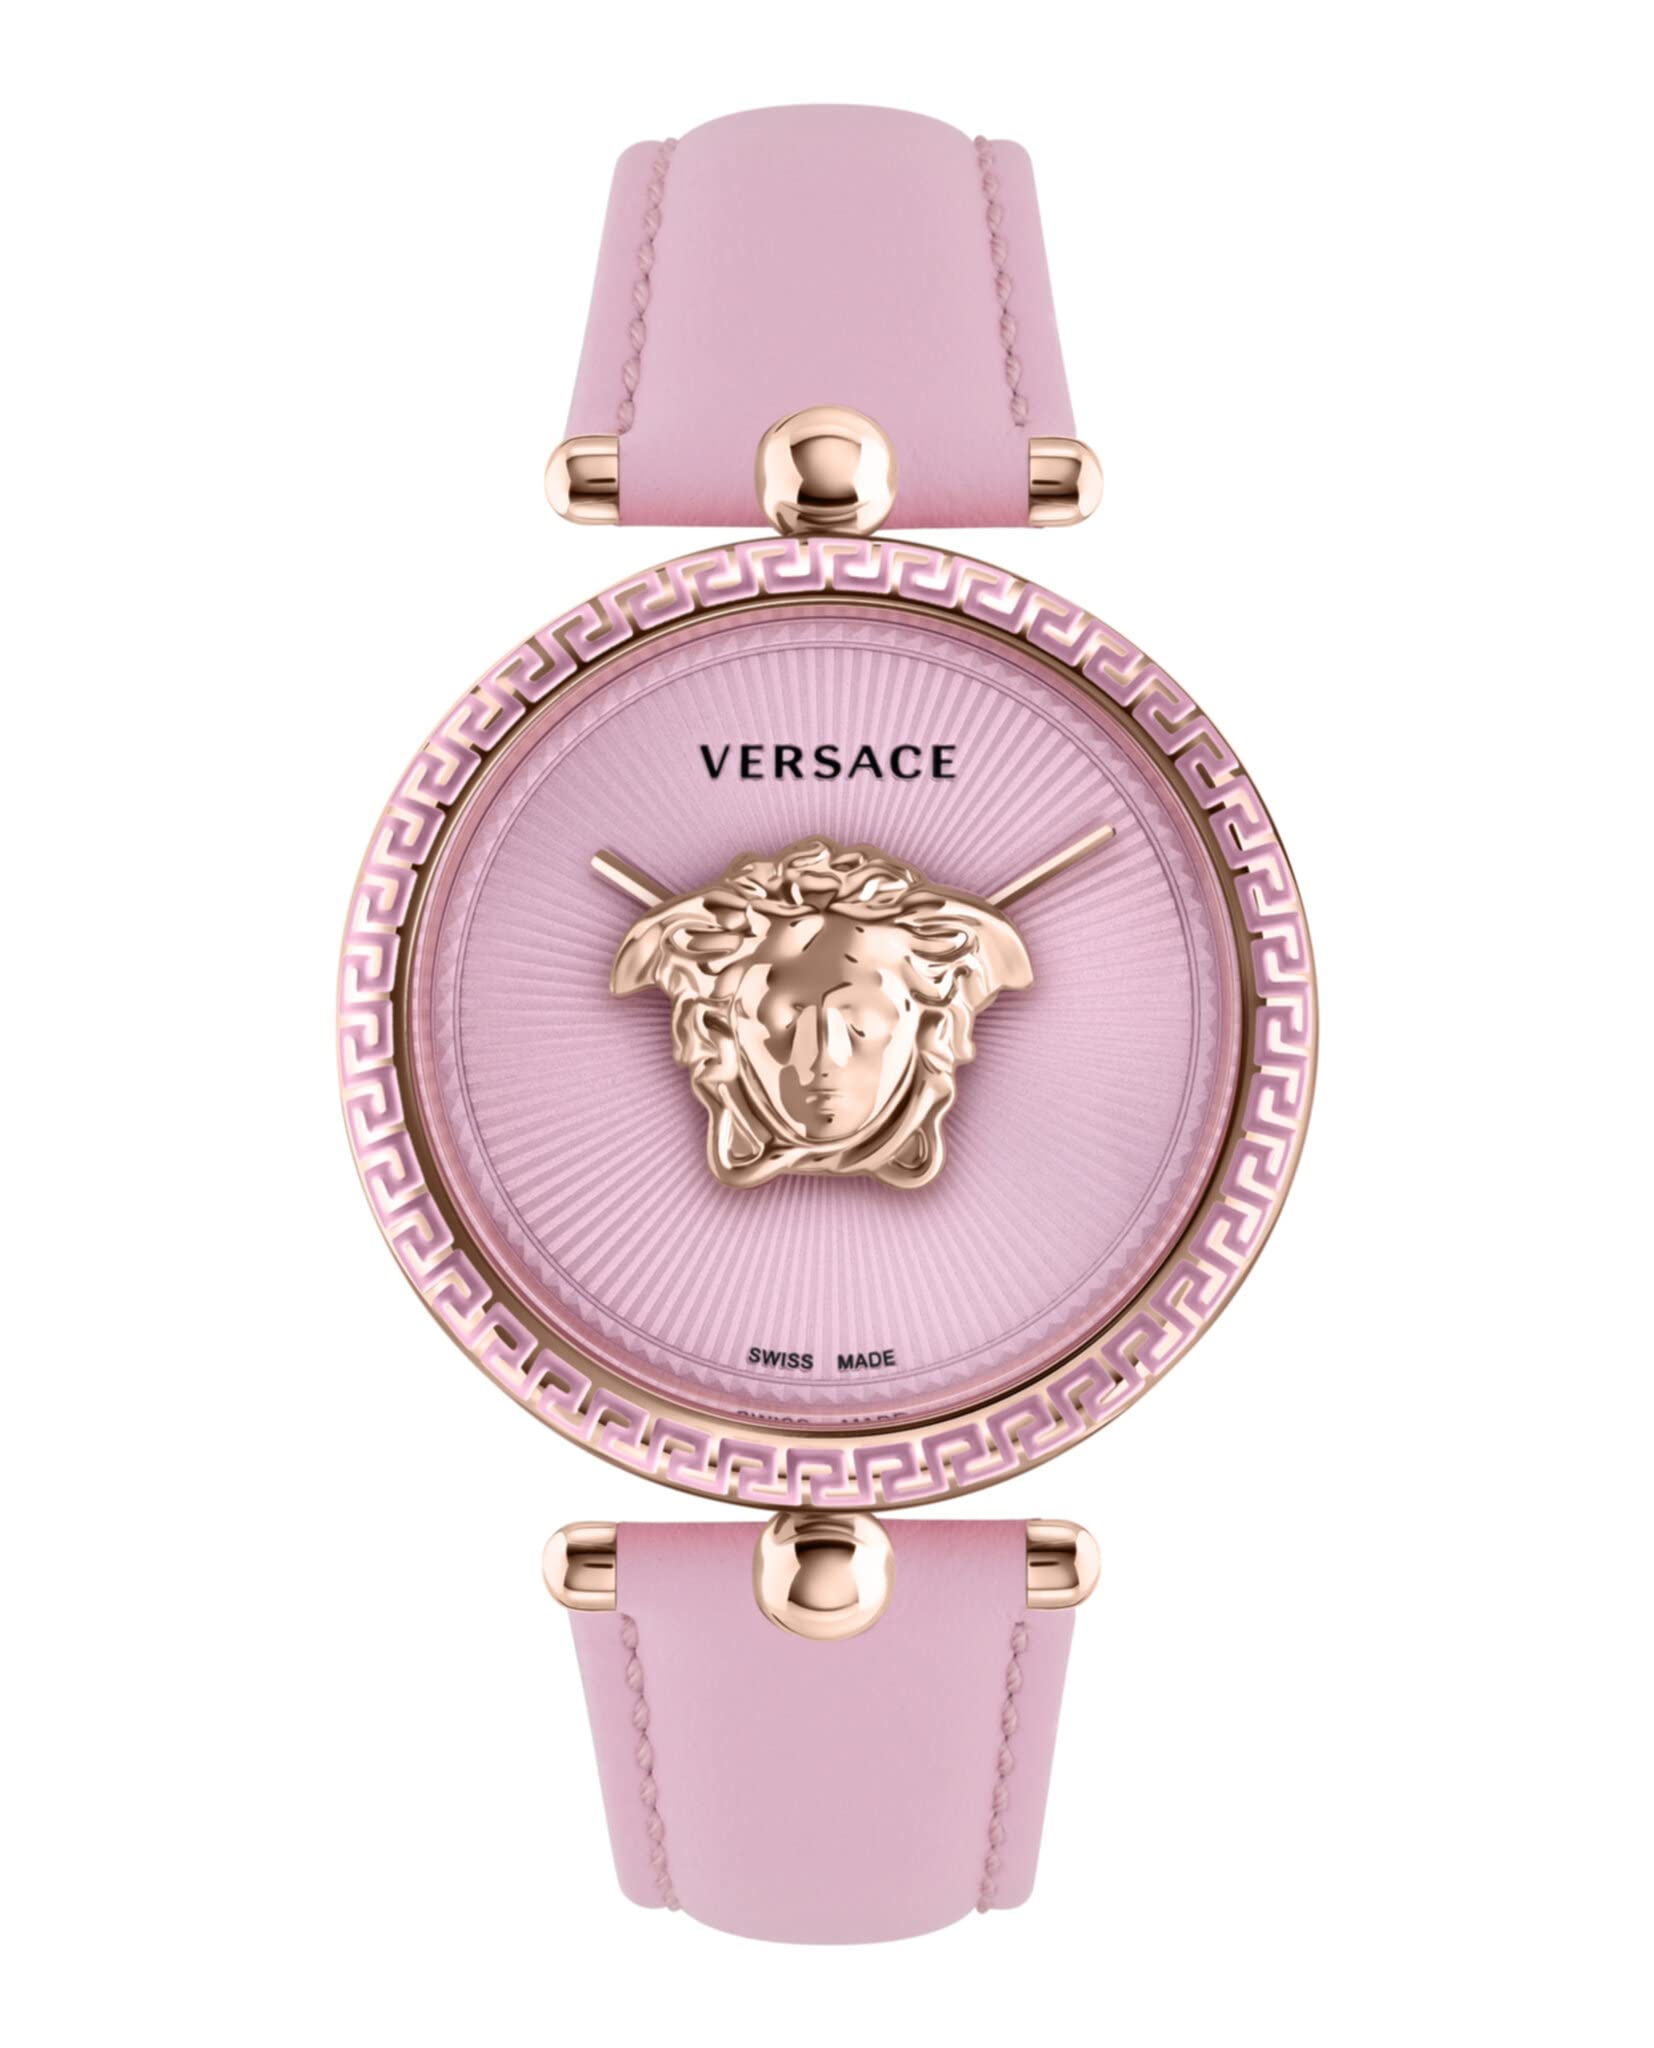 Versace Palazzo Empire Collection Luxury Womens Watch Timepiece